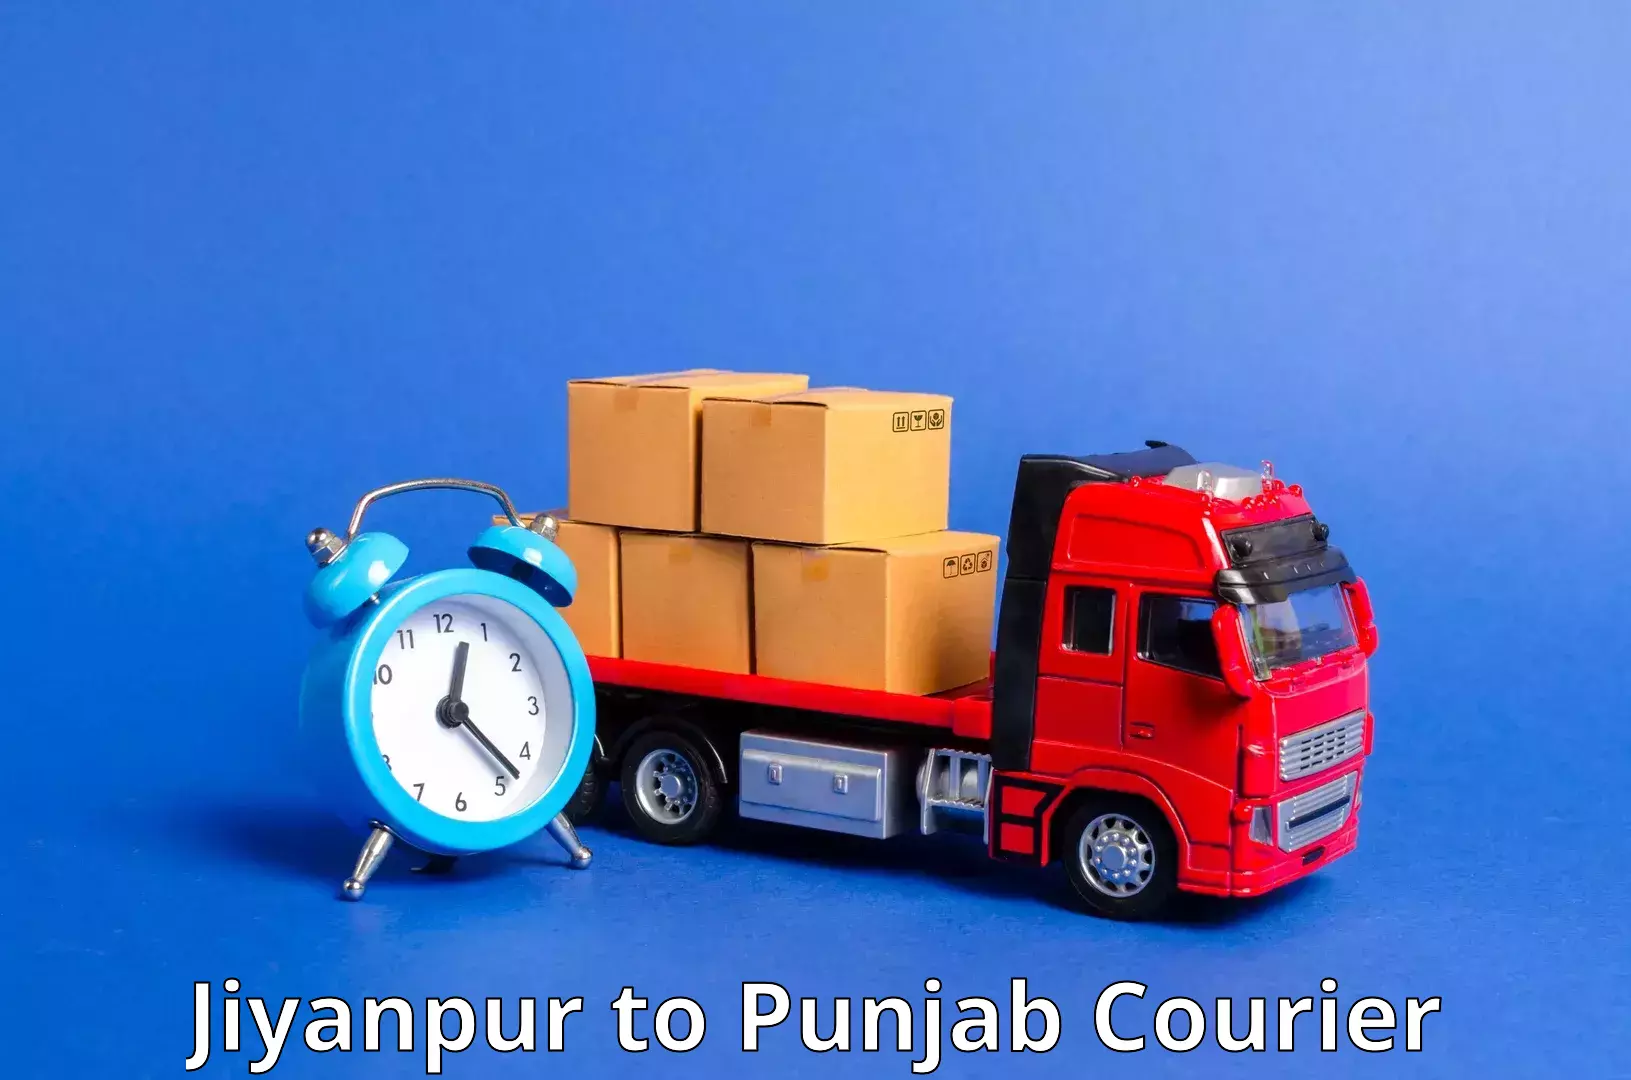 Multi-national courier services Jiyanpur to Punjab